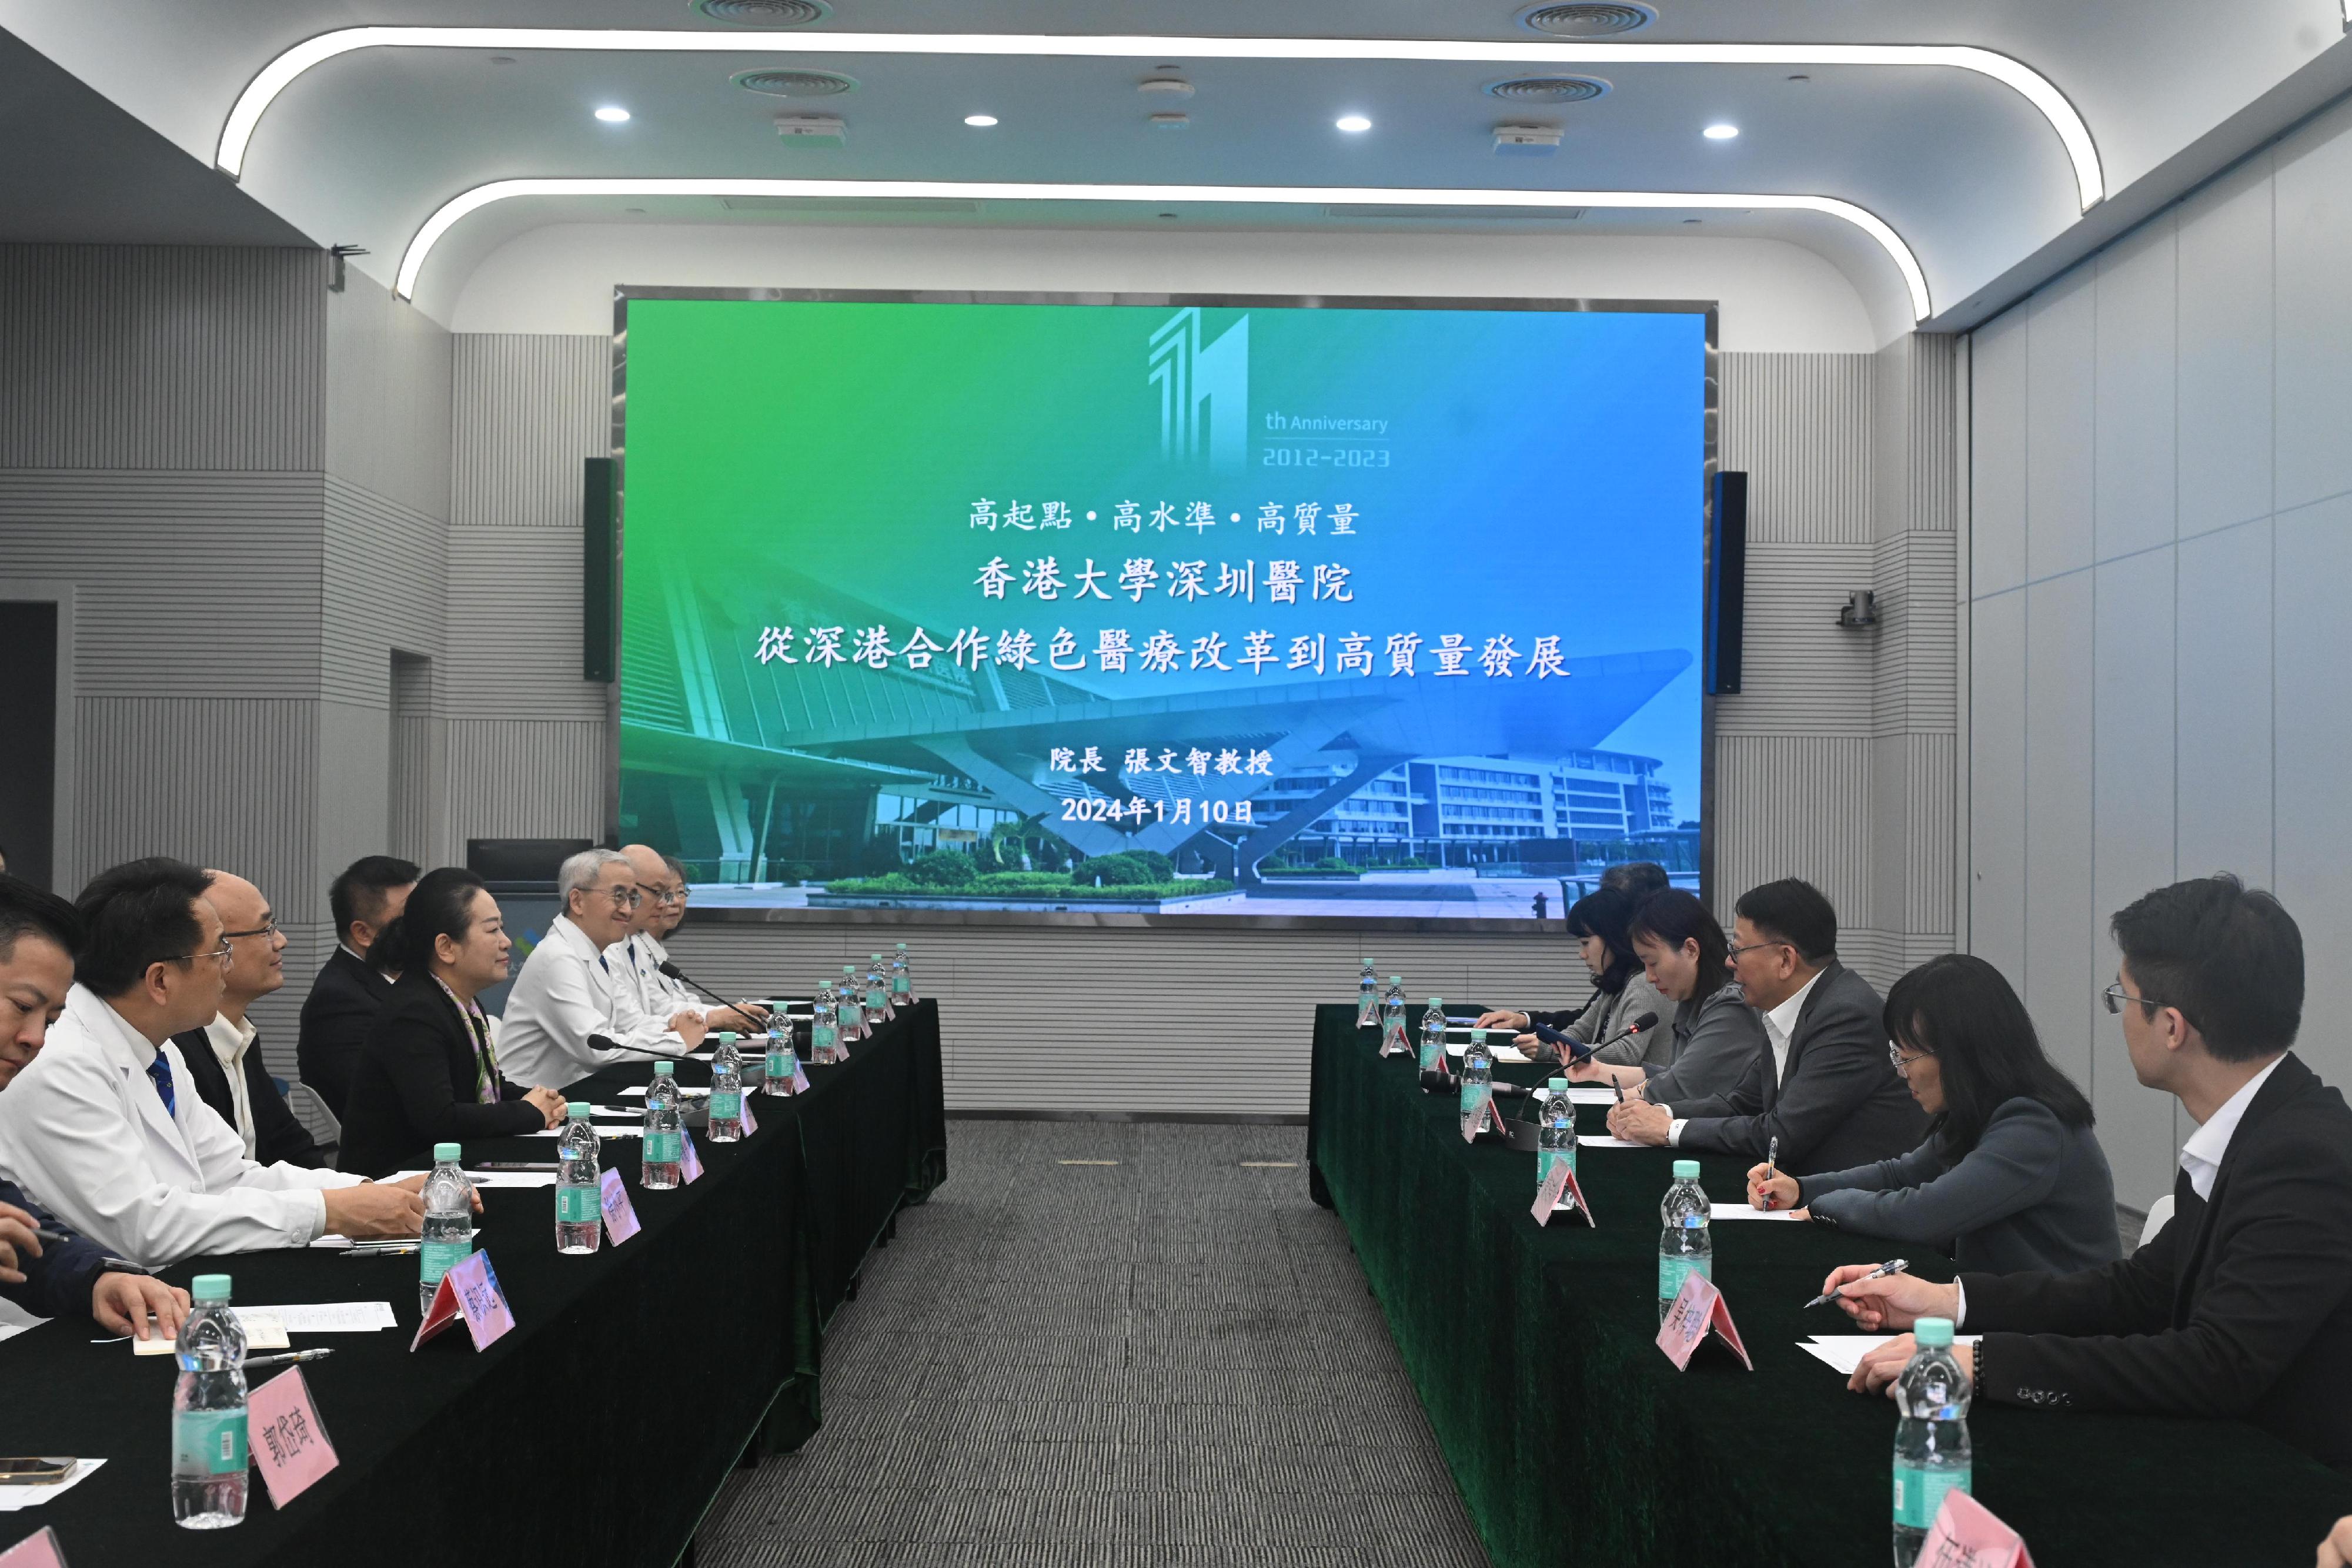 The Chief Secretary for Administration, Mr Chan Kwok-ki, today (January 10) visited Shenzhen and concluded his visit to Mainland cities of the Guangdong-Hong Kong-Macao Greater Bay Area. Photo shows Mr Chan (third right) conversing with the Party Secretary and Director General of the Shenzhen Municipal Health Commission, Ms Wu Hongyan (fourth left), the Chief Executive of The University of Hong Kong-Shenzhen Hospital, Professor Kenneth Cheung (sixth left), and medical staff.